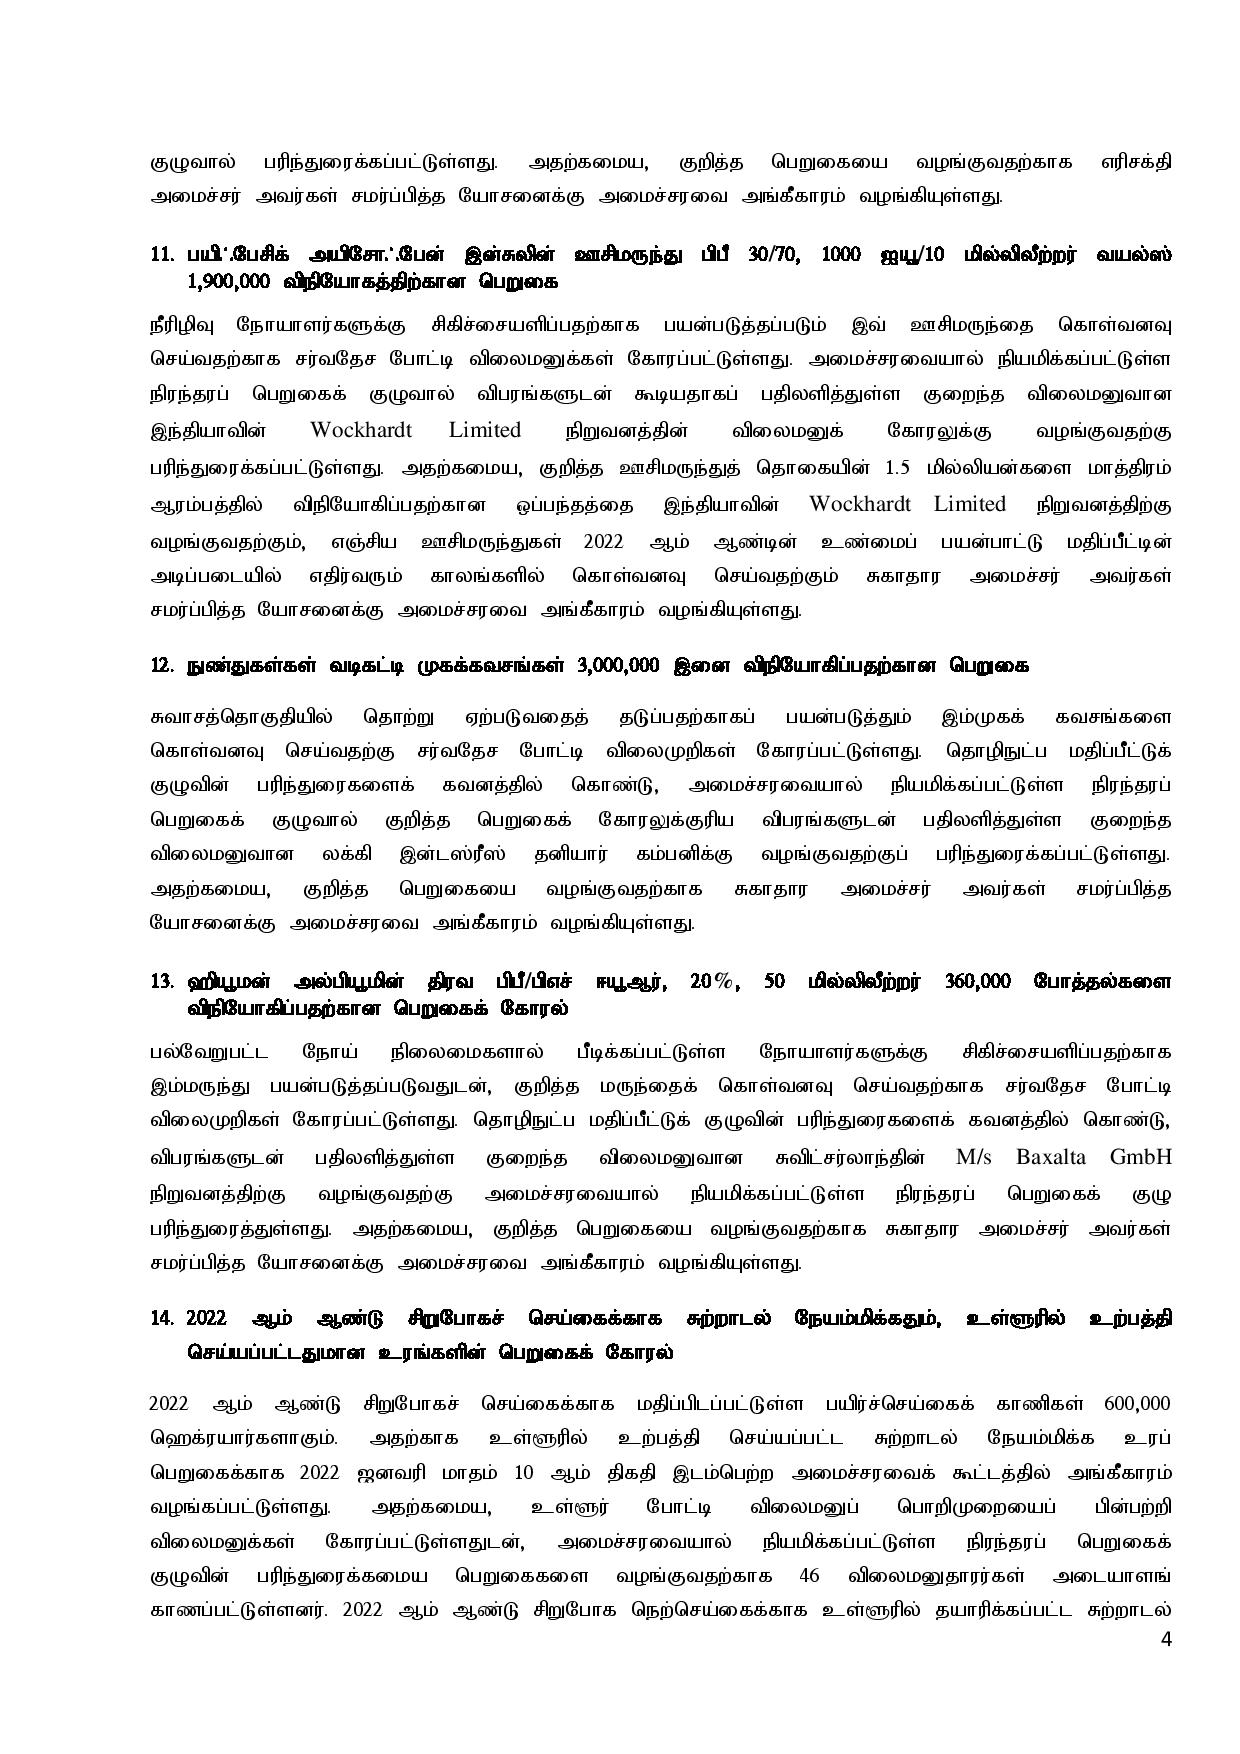 Cabinet Decisions on 14.03.2022 Tamil page 004